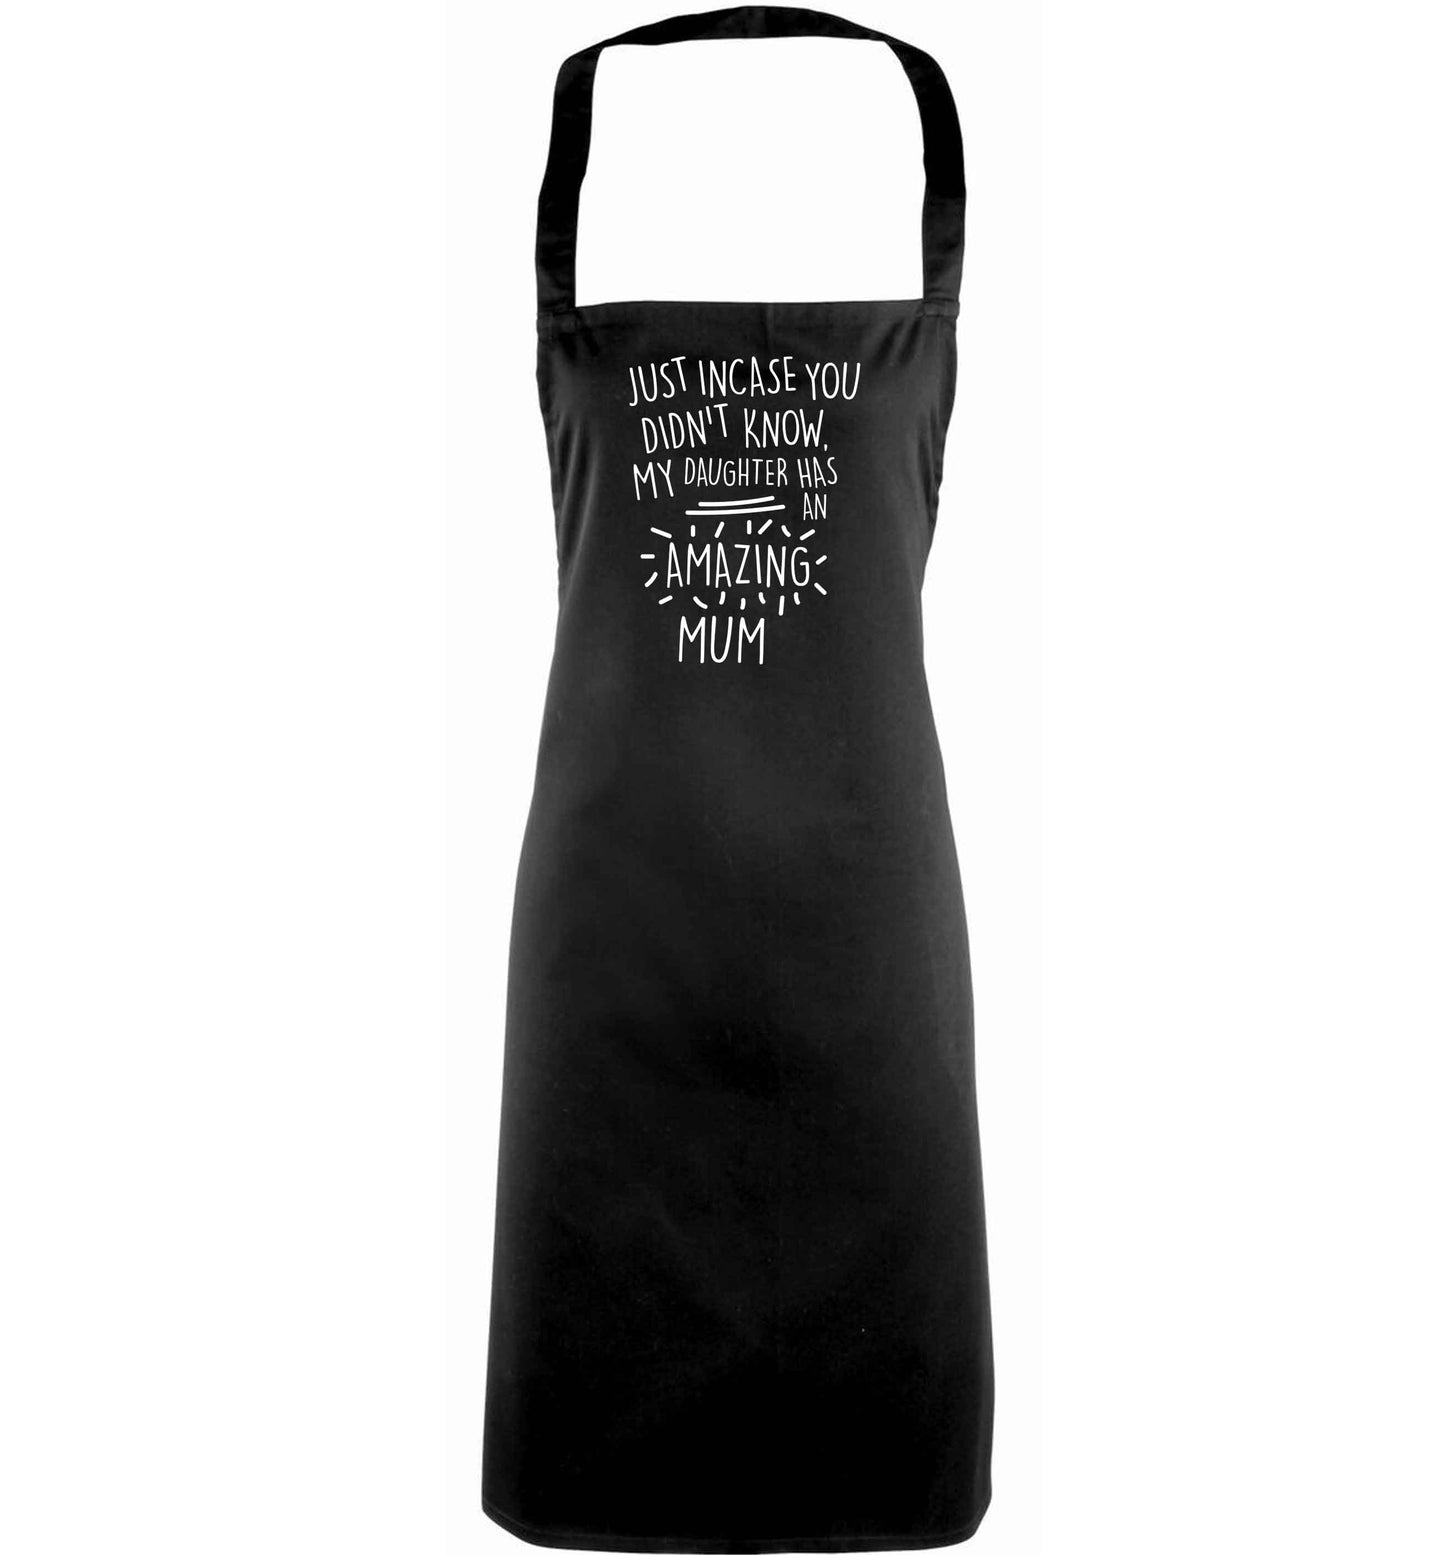 Just incase you didn't know my daughter has an amazing mum adults black apron